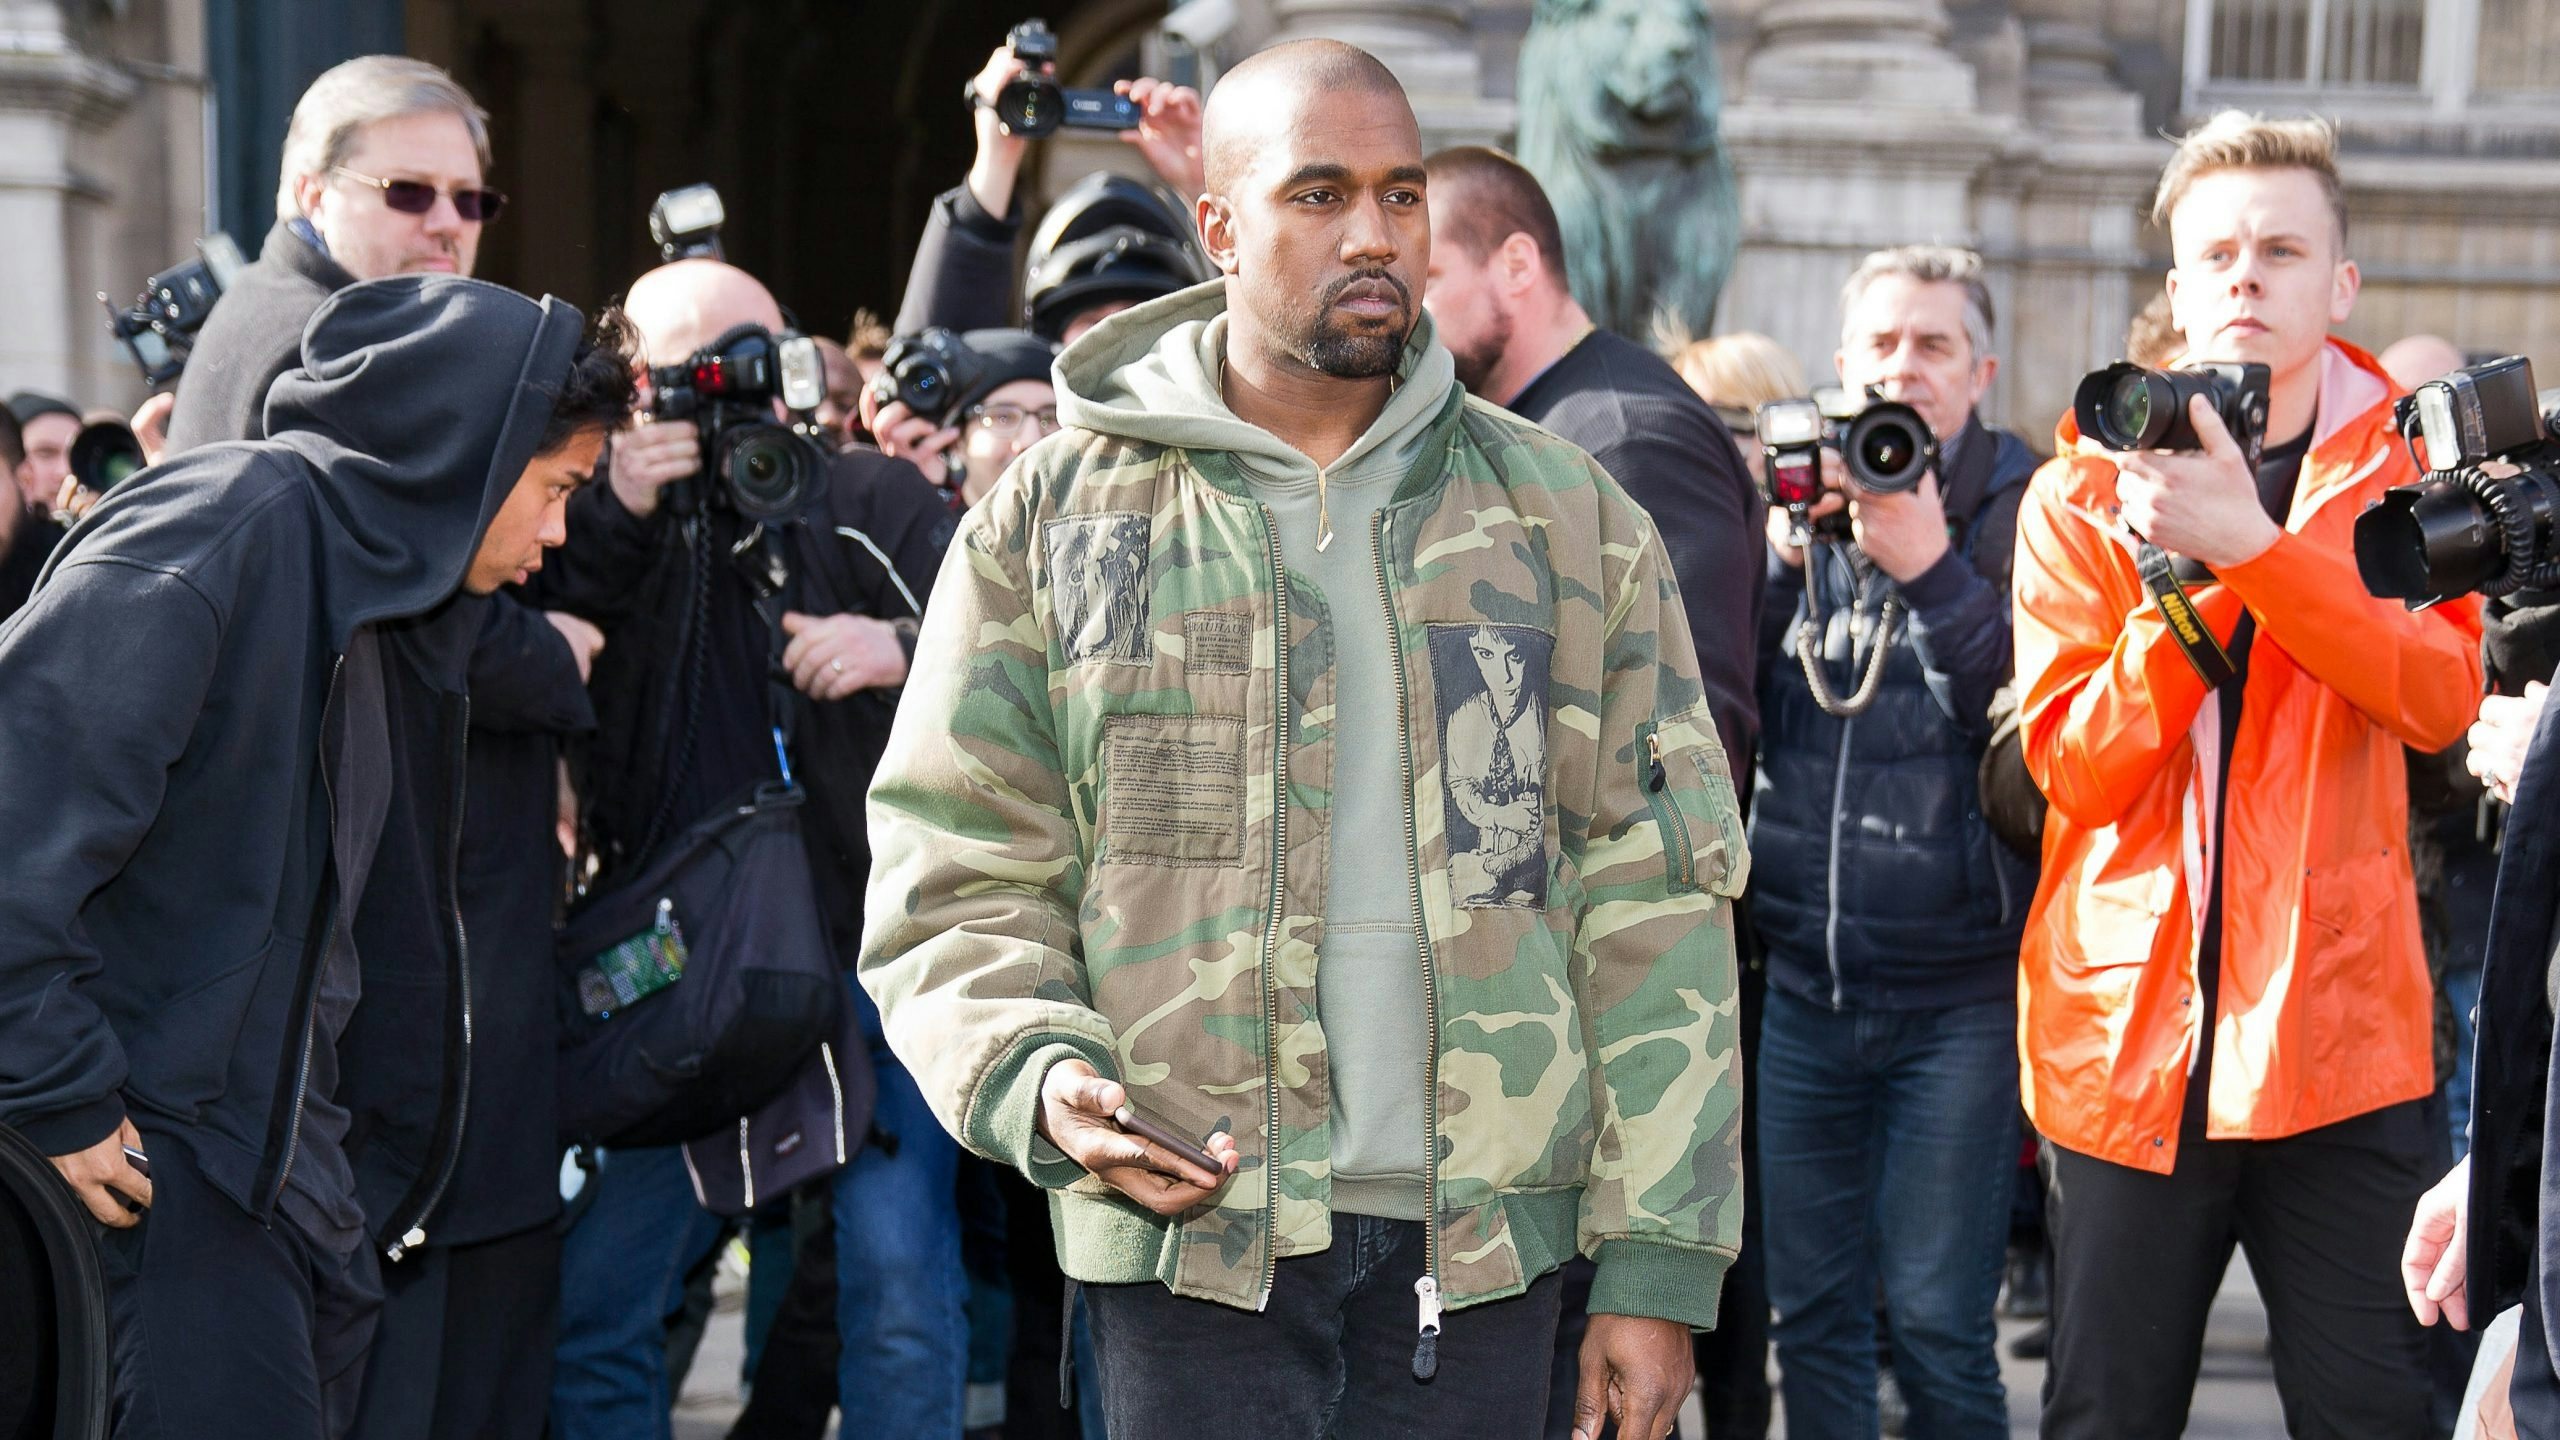 Ye is back in the news following a Twitter suspension and controversial PFW showcase. Now he’s set to acquire right-wing Web3 platform Parler. Photo: Shutterstock